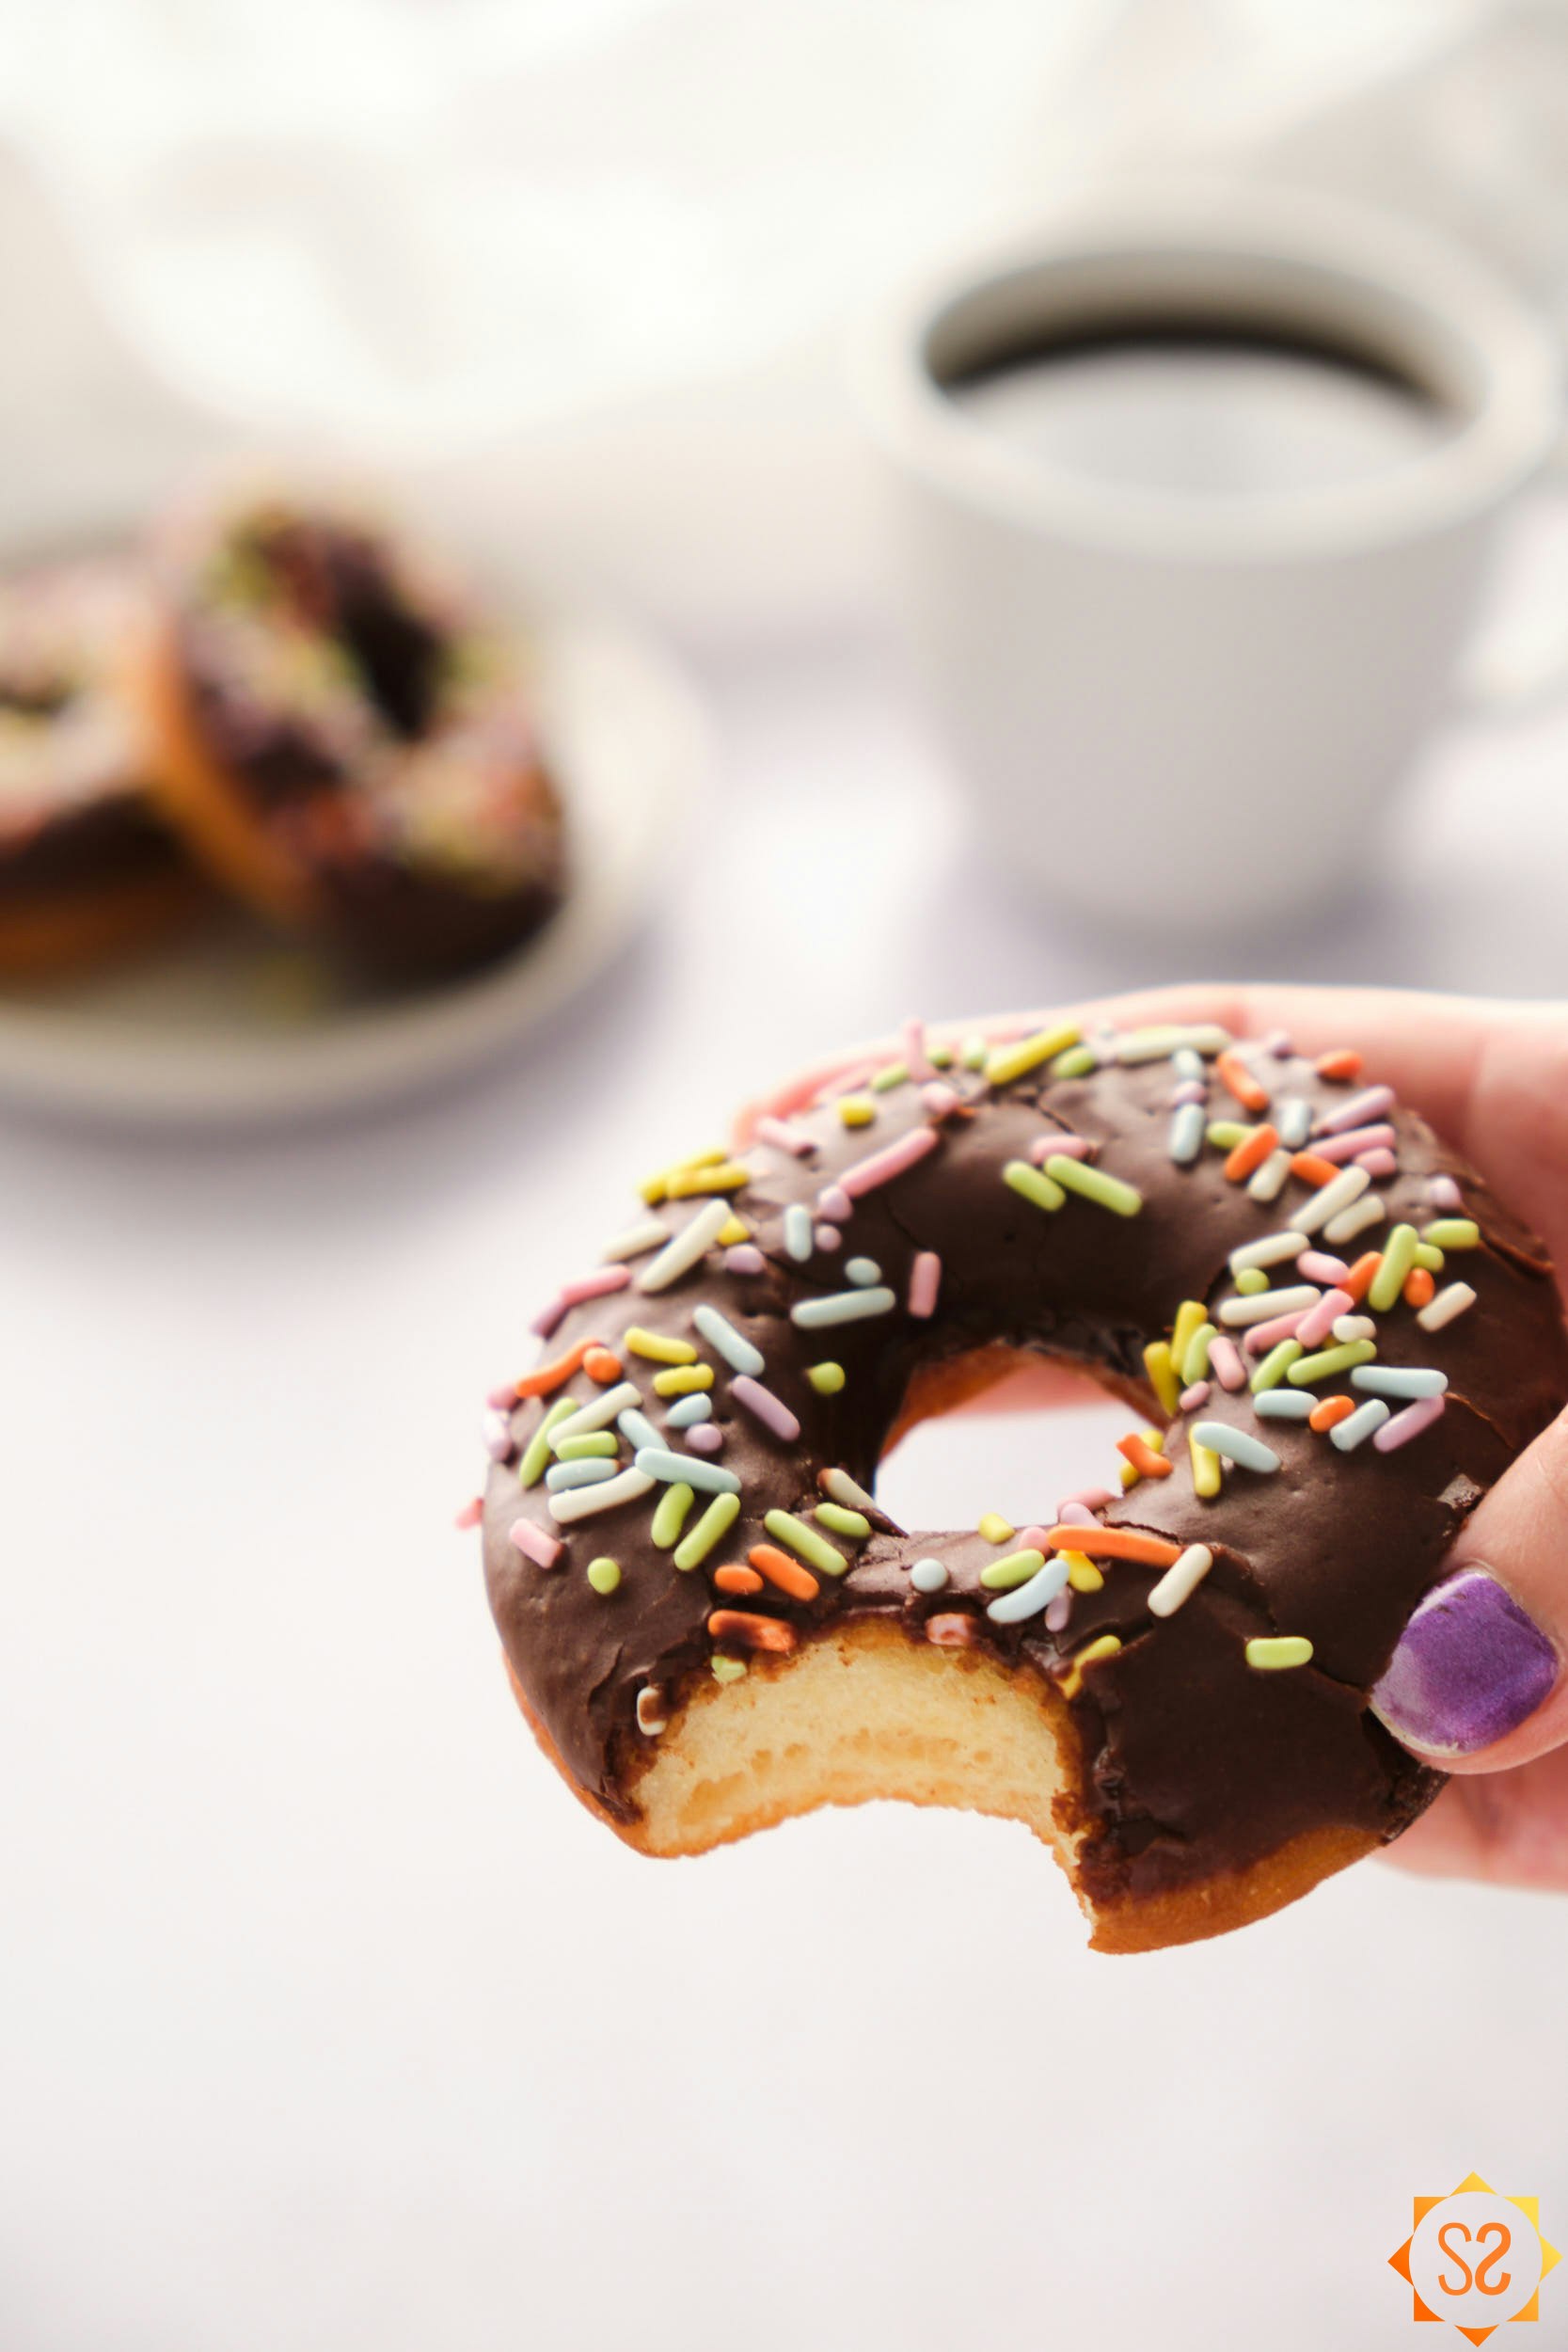 A hand holding a bitten chocolate frosted donut, with a plate of donuts and coffee in the background